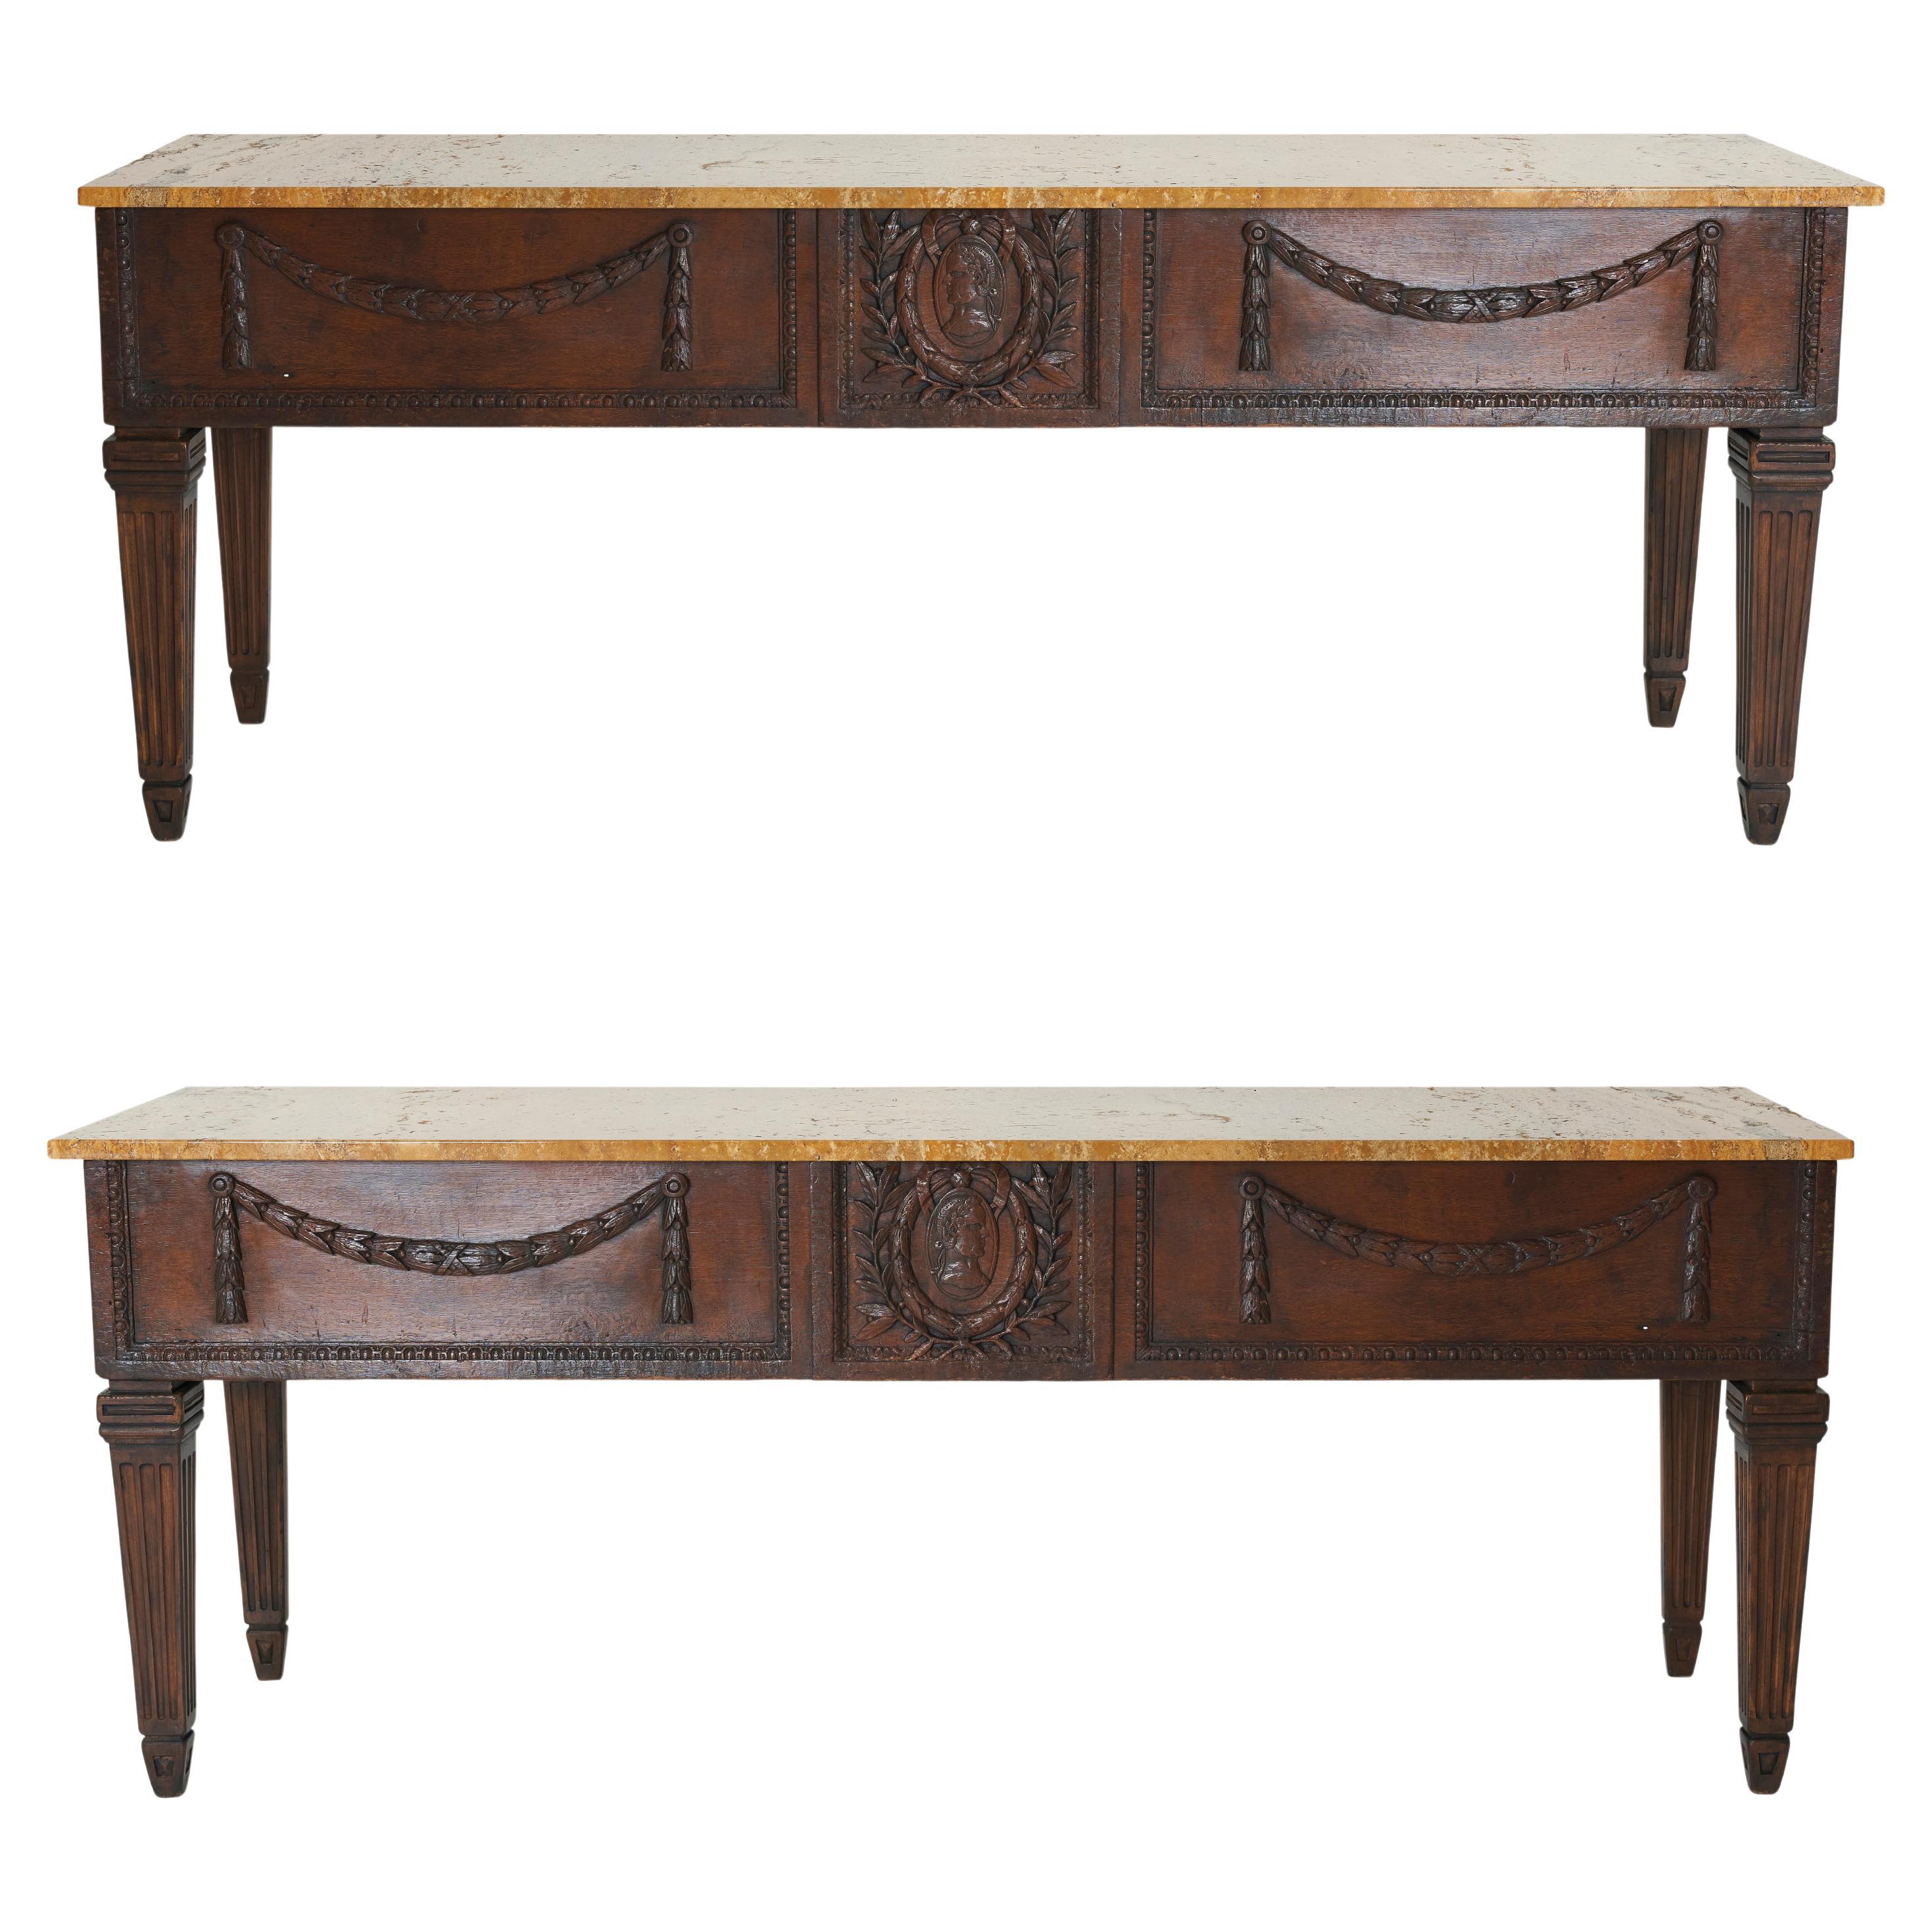 A Pair of Neoclassical Style Consoles with Ocher Travertine Tops by Billy Haines For Sale